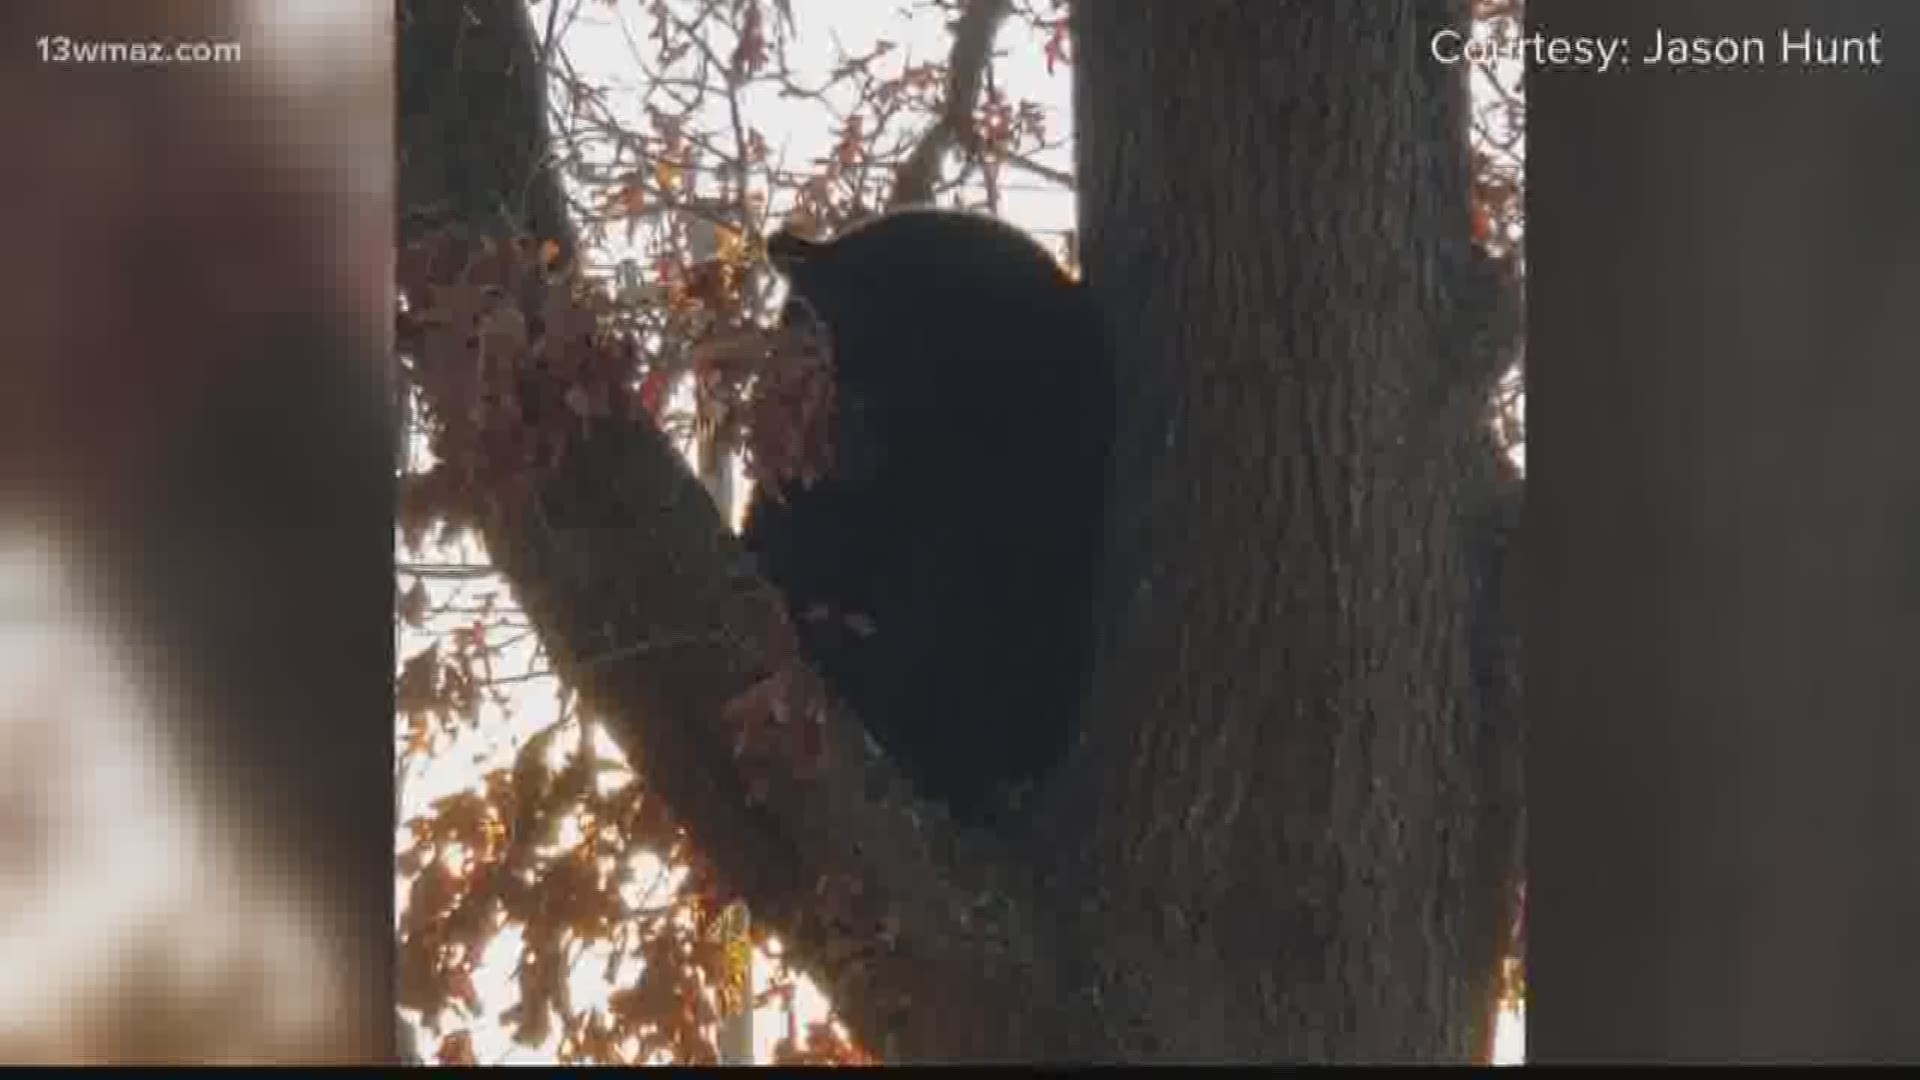 Some people in Warner Robins spotted something unusual in tree on Highway 247 -- the Department of Natural Resources says it was a large bear.